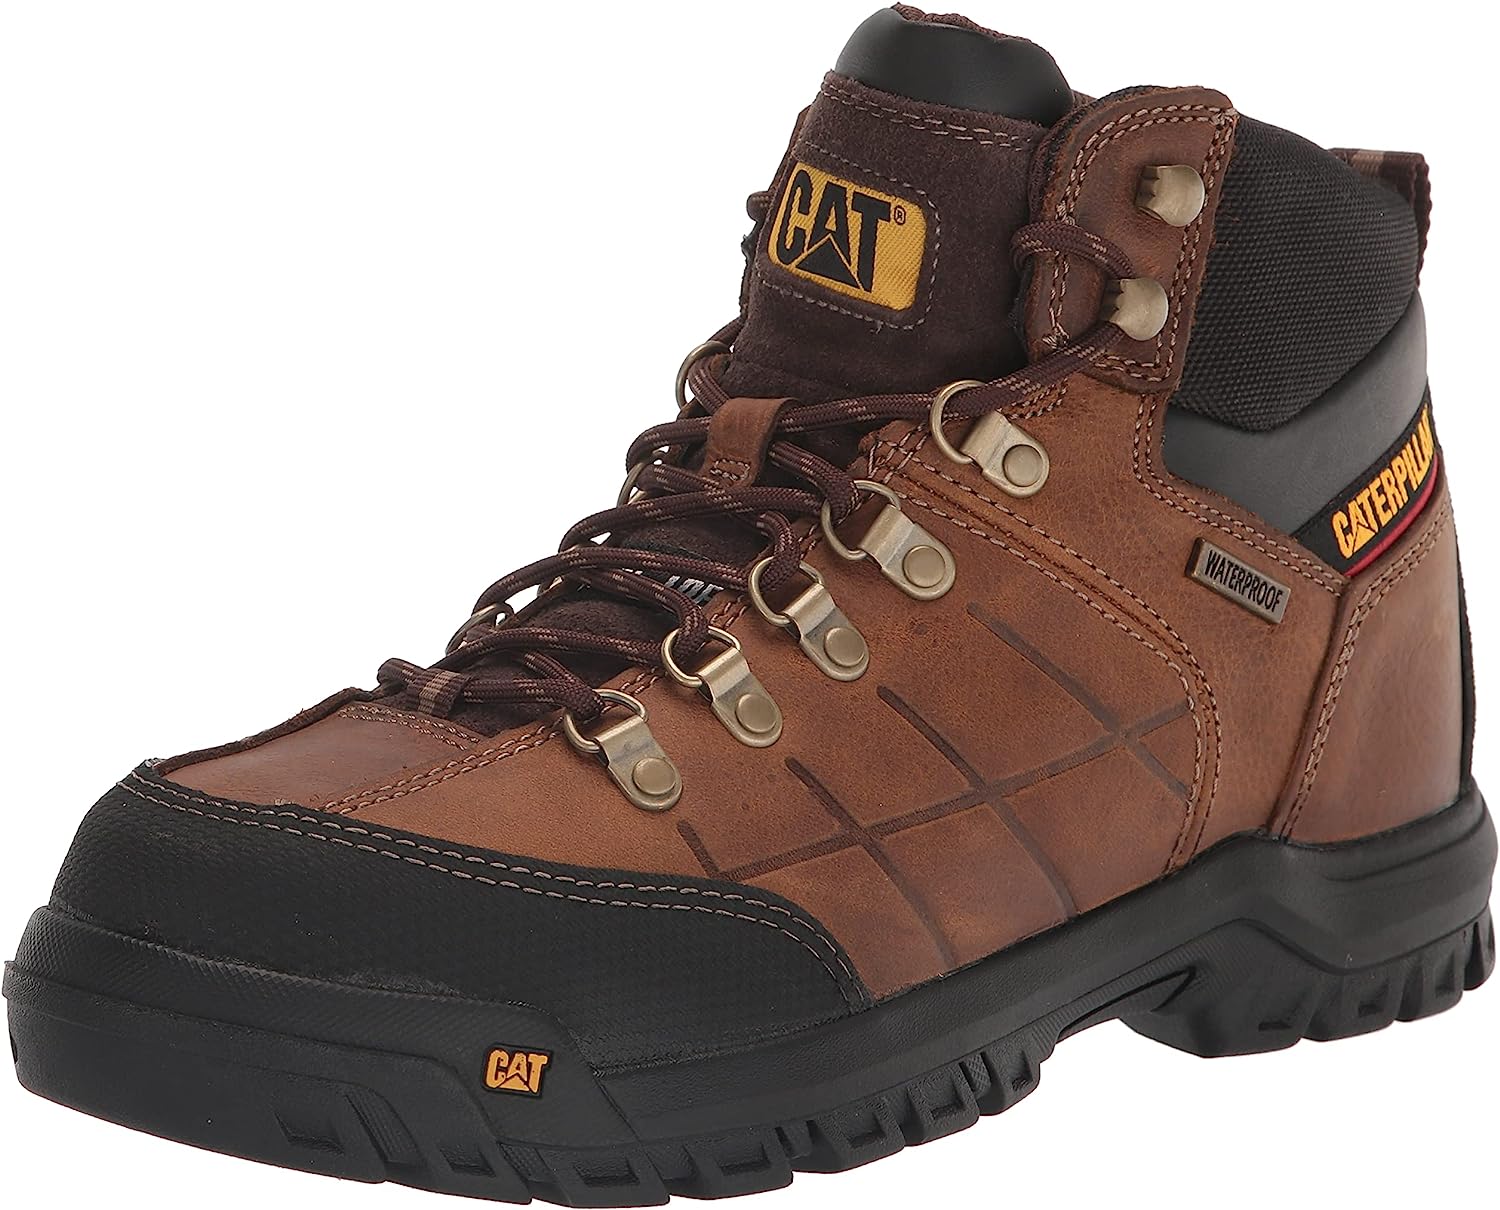 construction boots review